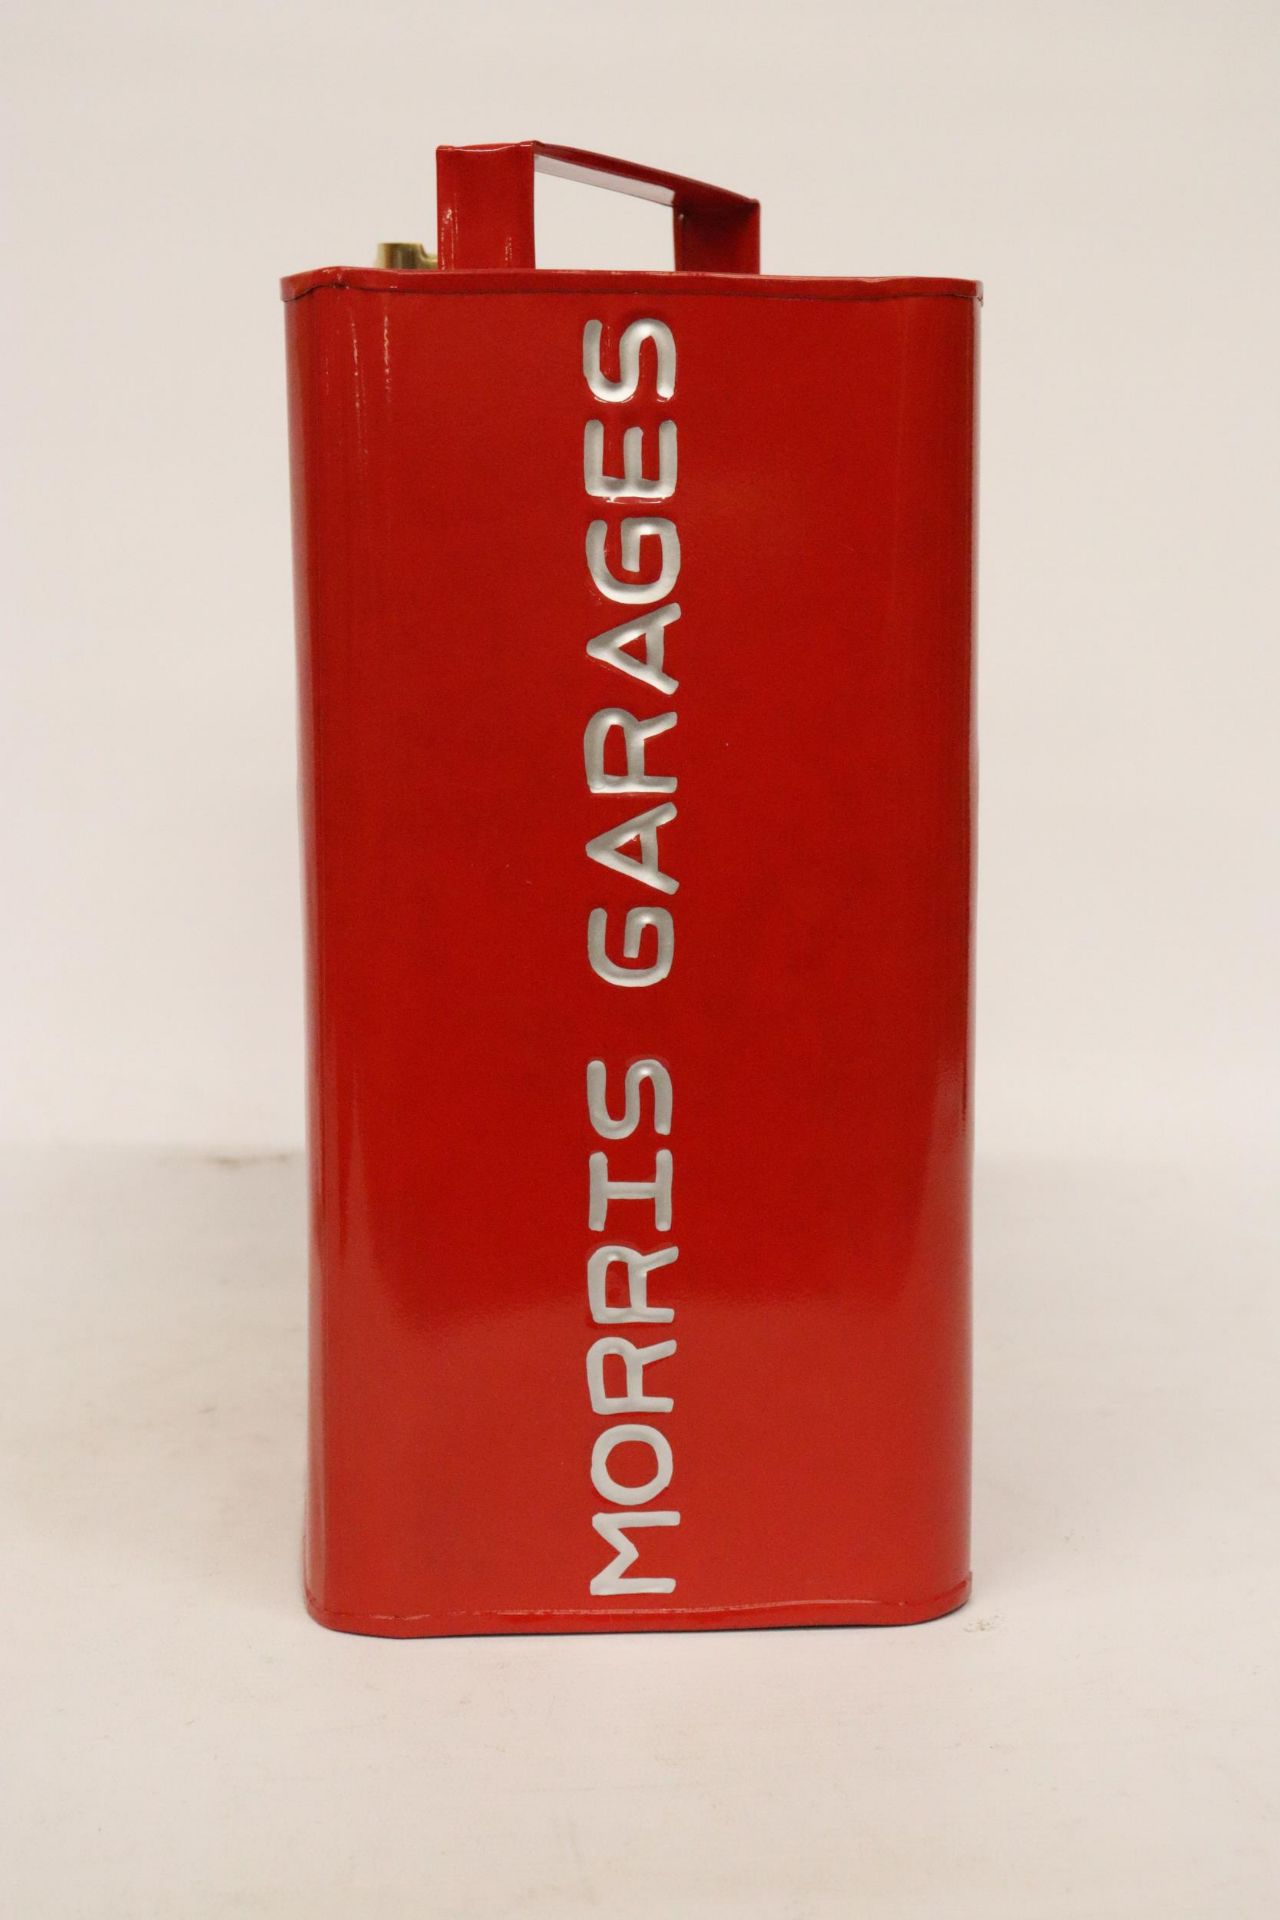 A RED MG PETROL CAN - Image 2 of 6